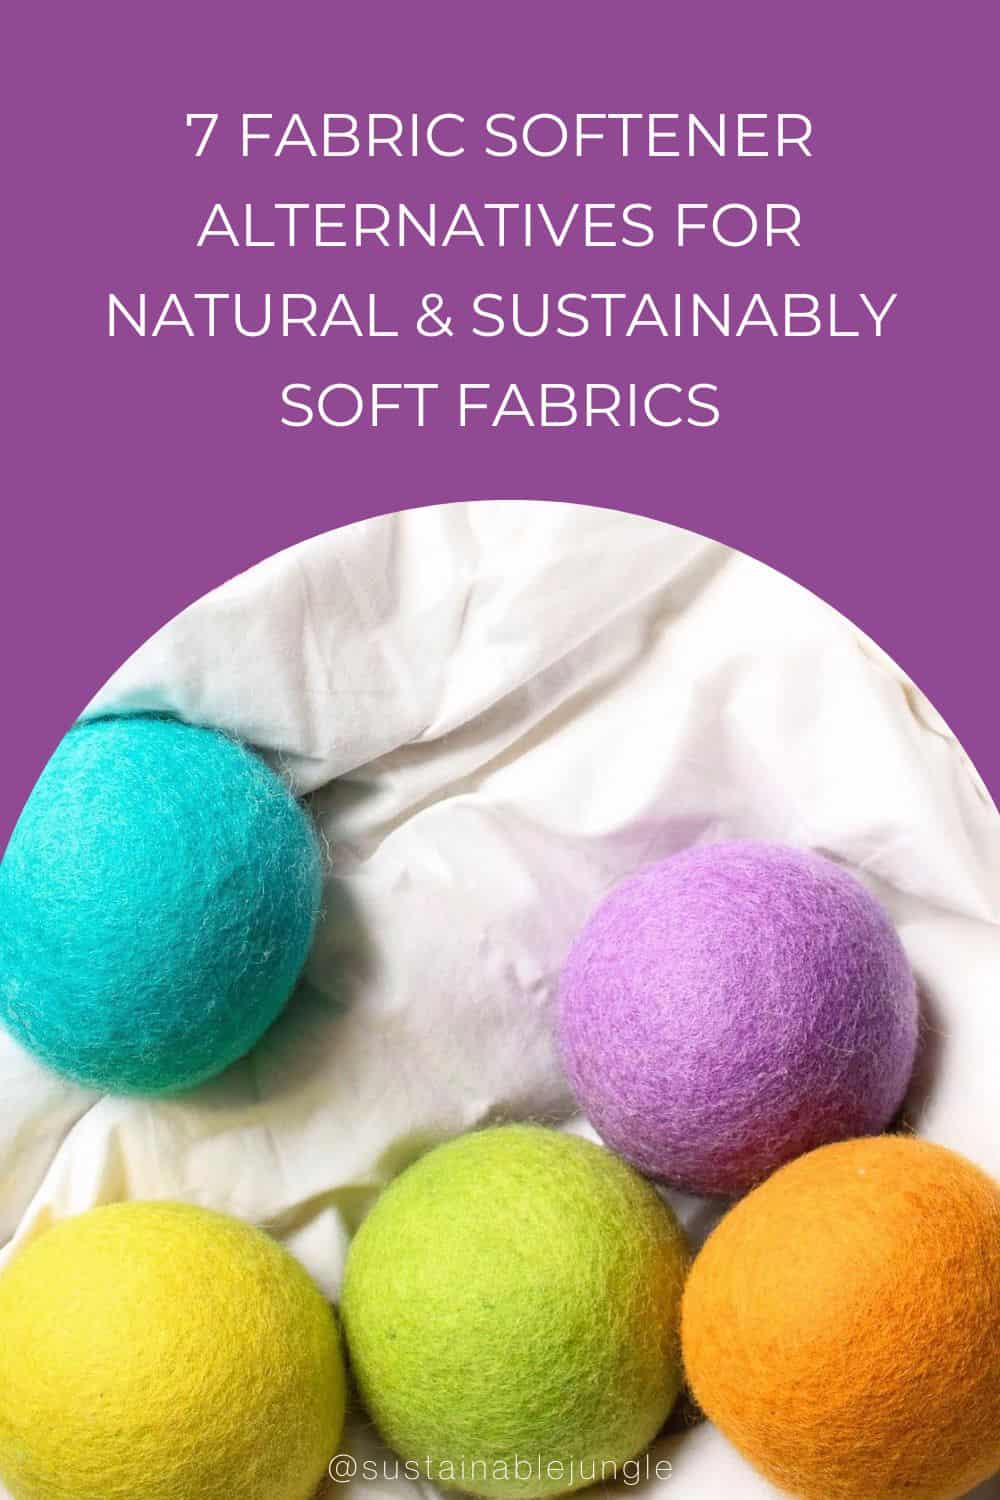 7 Fabric Softener Alternatives For Natural & Sustainably Soft Fabrics Image by Friendsheep Wool #fabricsofteneralternatives #fabricsoftenersheetalternatives #alternativetofabricsoftener #ecofriendlyalternativestofabricsoftener #naturalalternativestofabricsoftener #sustainablejungle